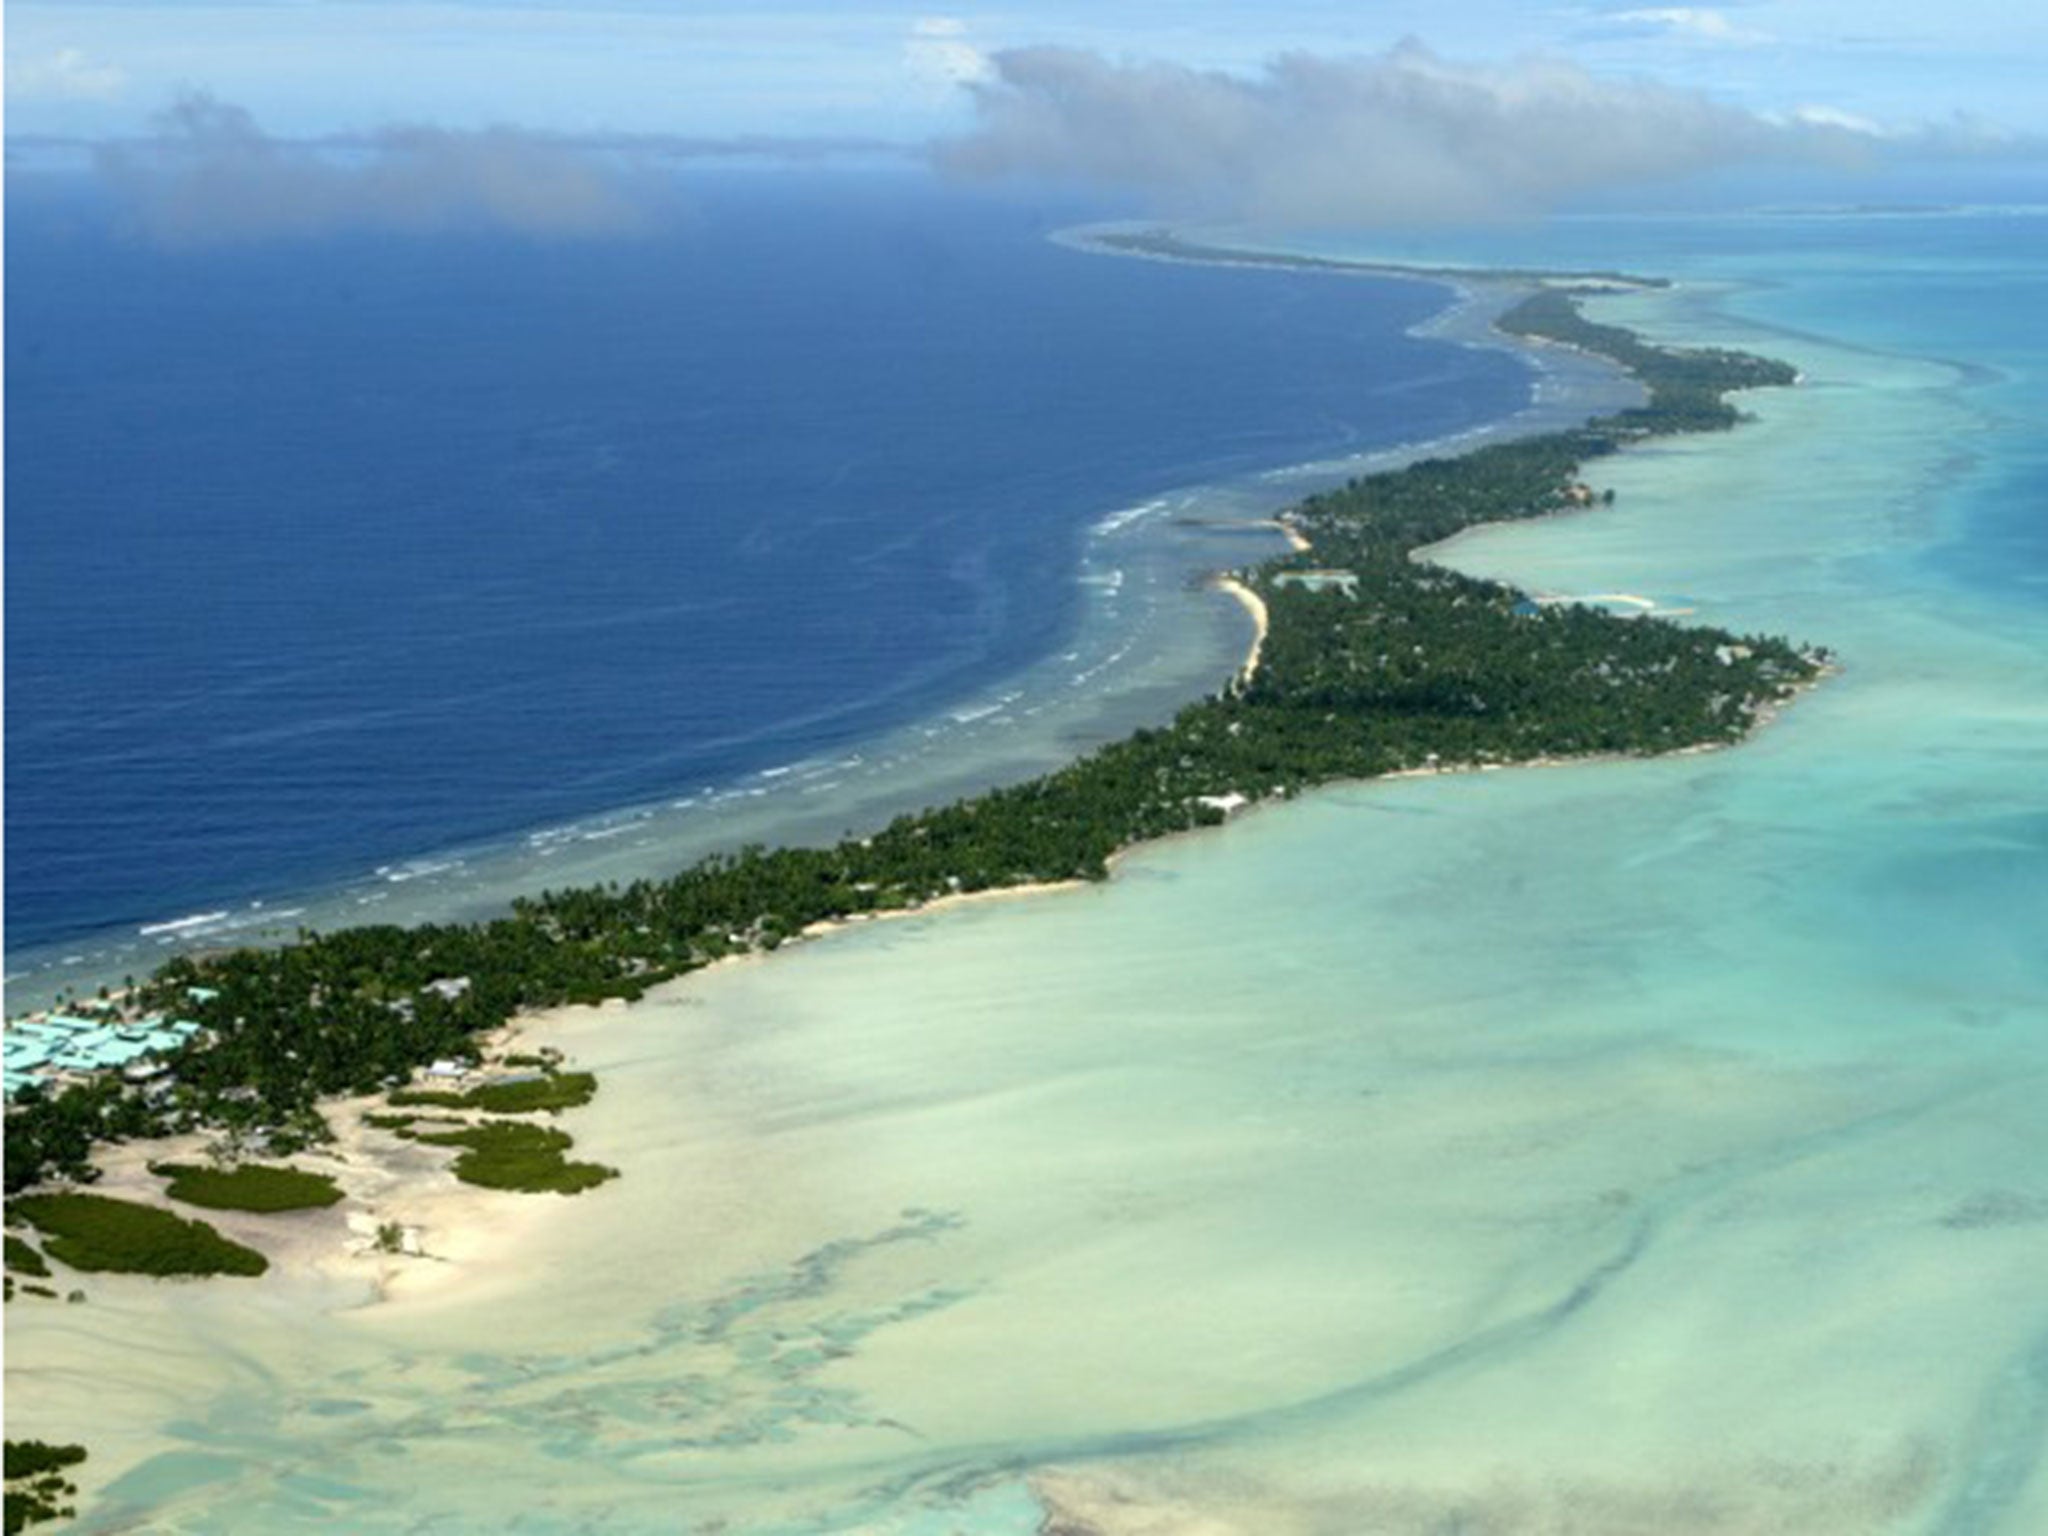 Kiribati is home to a population of 100,000